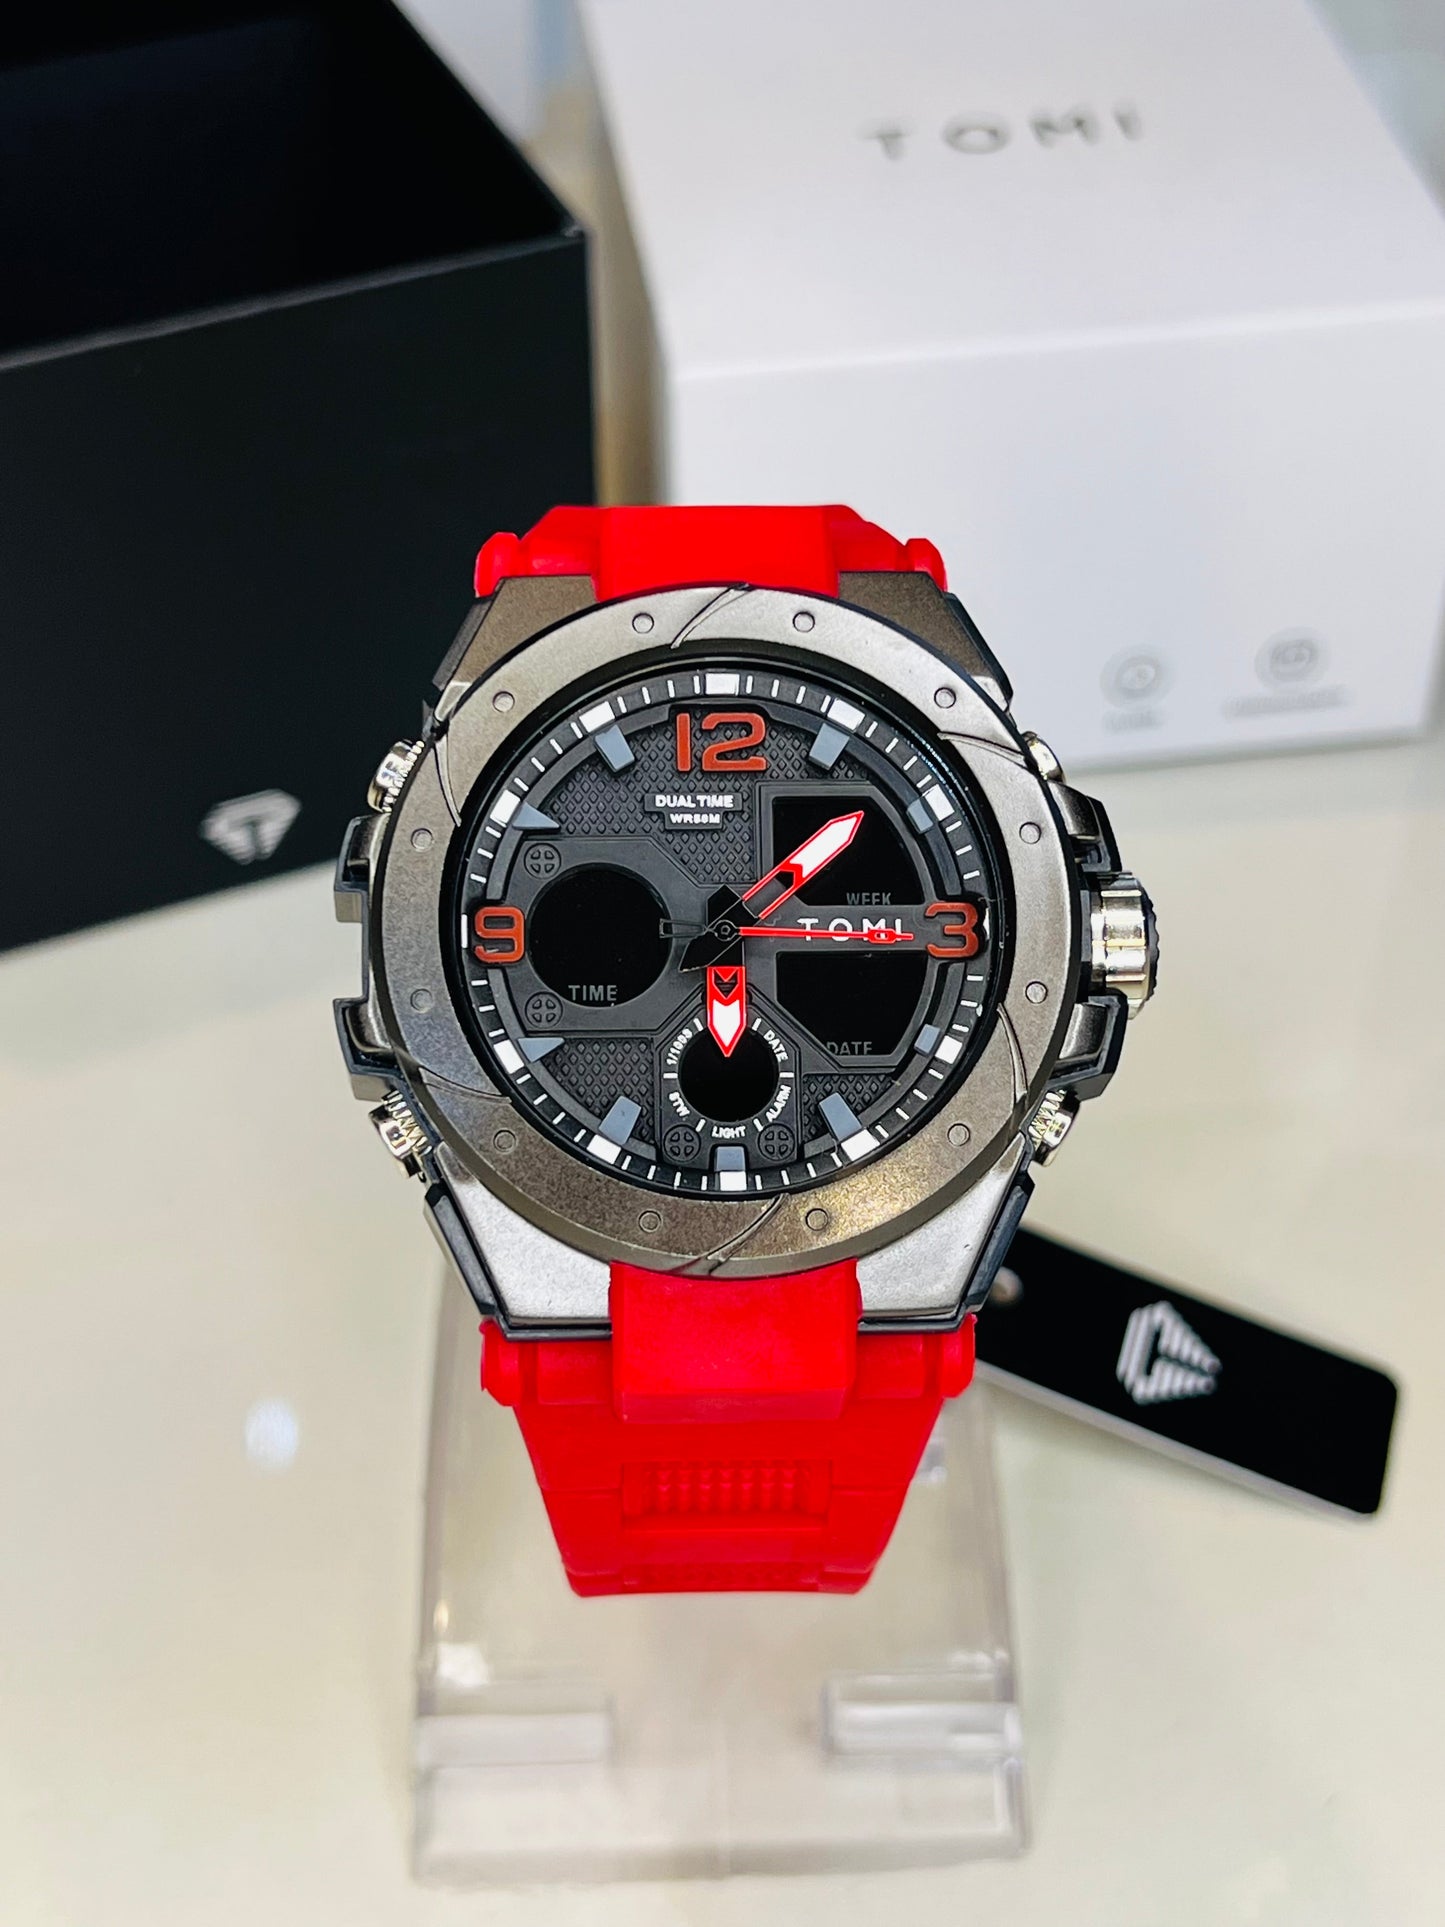 TOMI T-235 Sports Watch Dual Time Digital Analogue